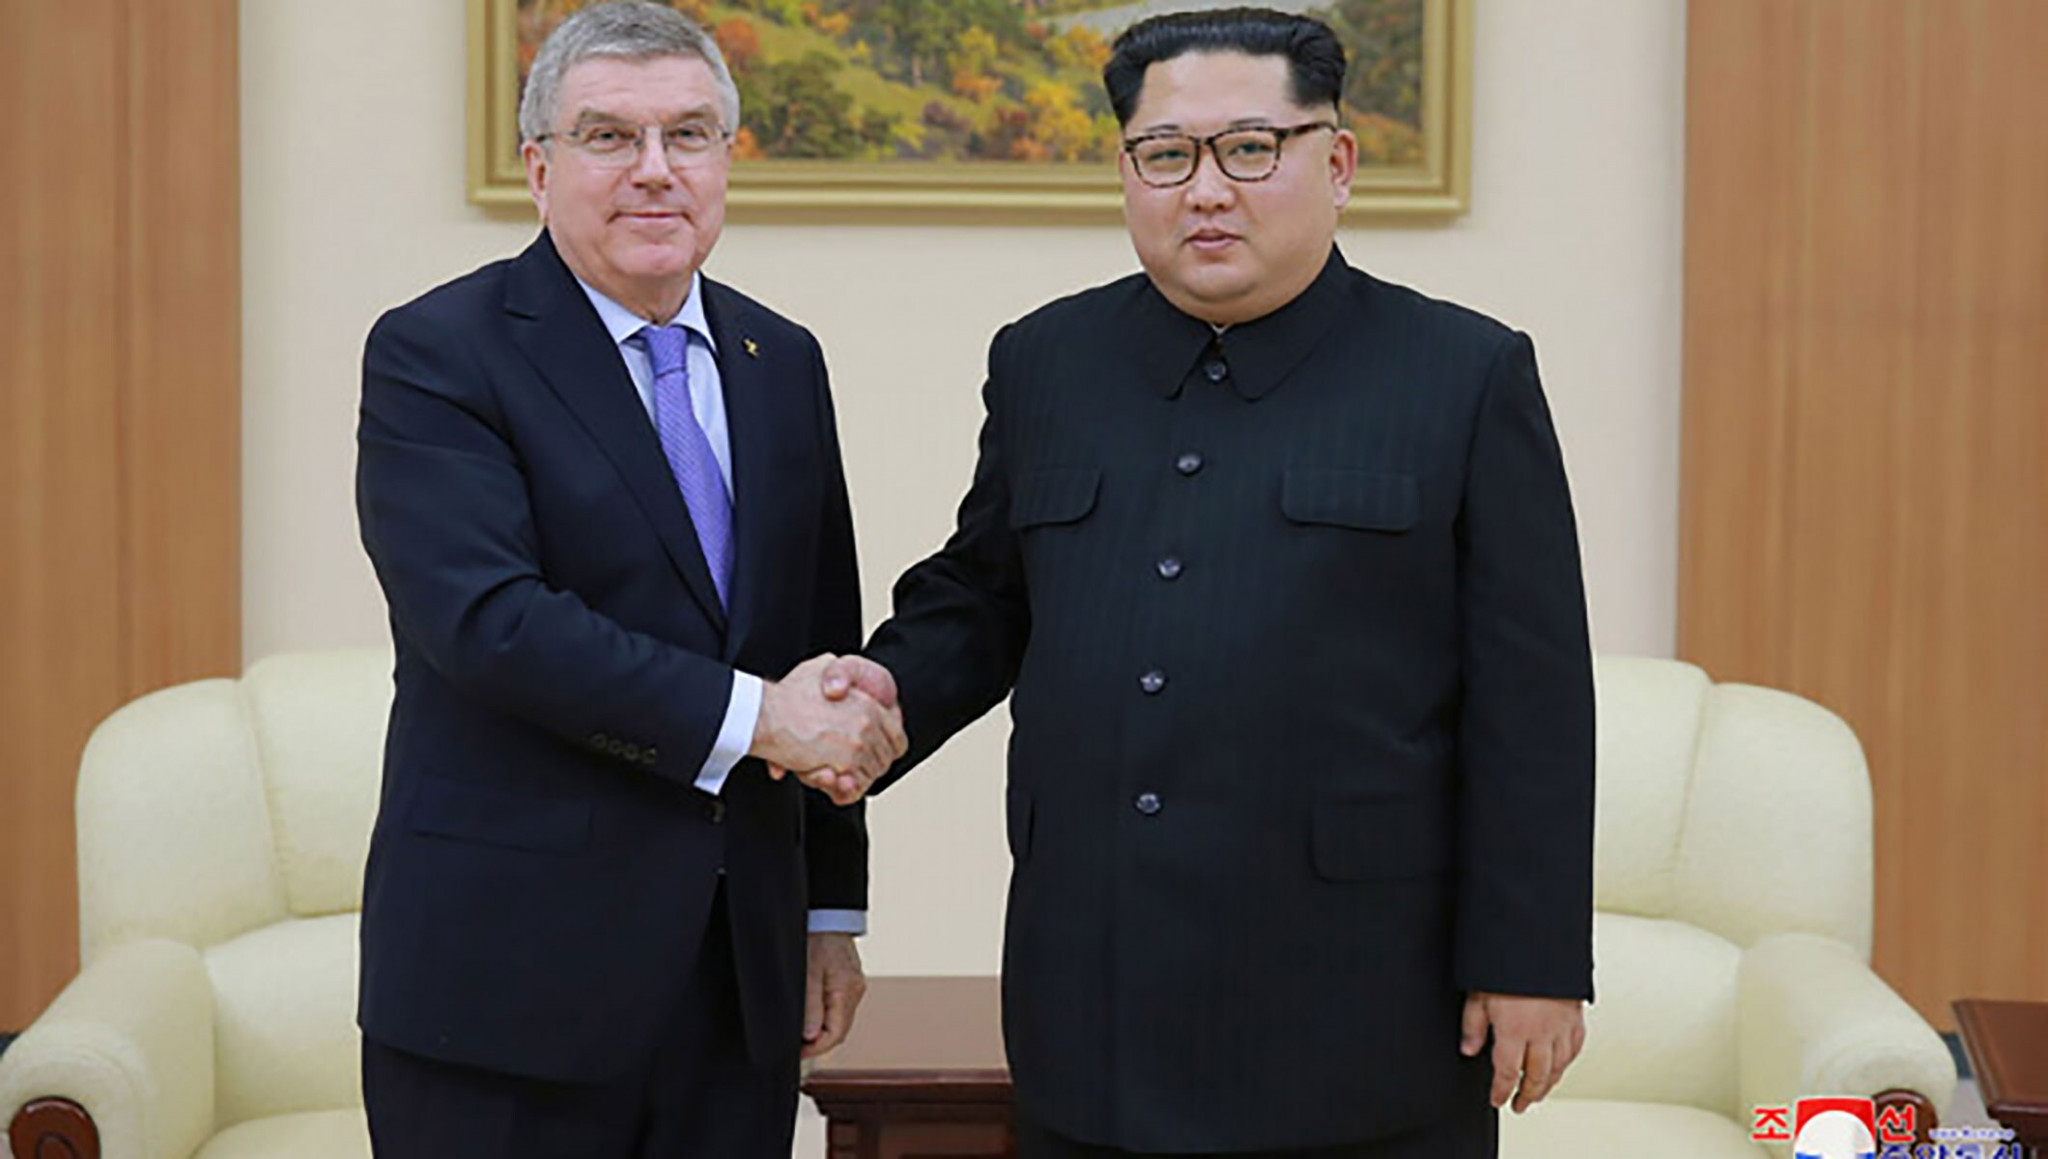 IOC President Thomas Bach travelled to Pyongyang to meet North Korea's supreme leader Kim Jong-un in March 2018 ©KNCA